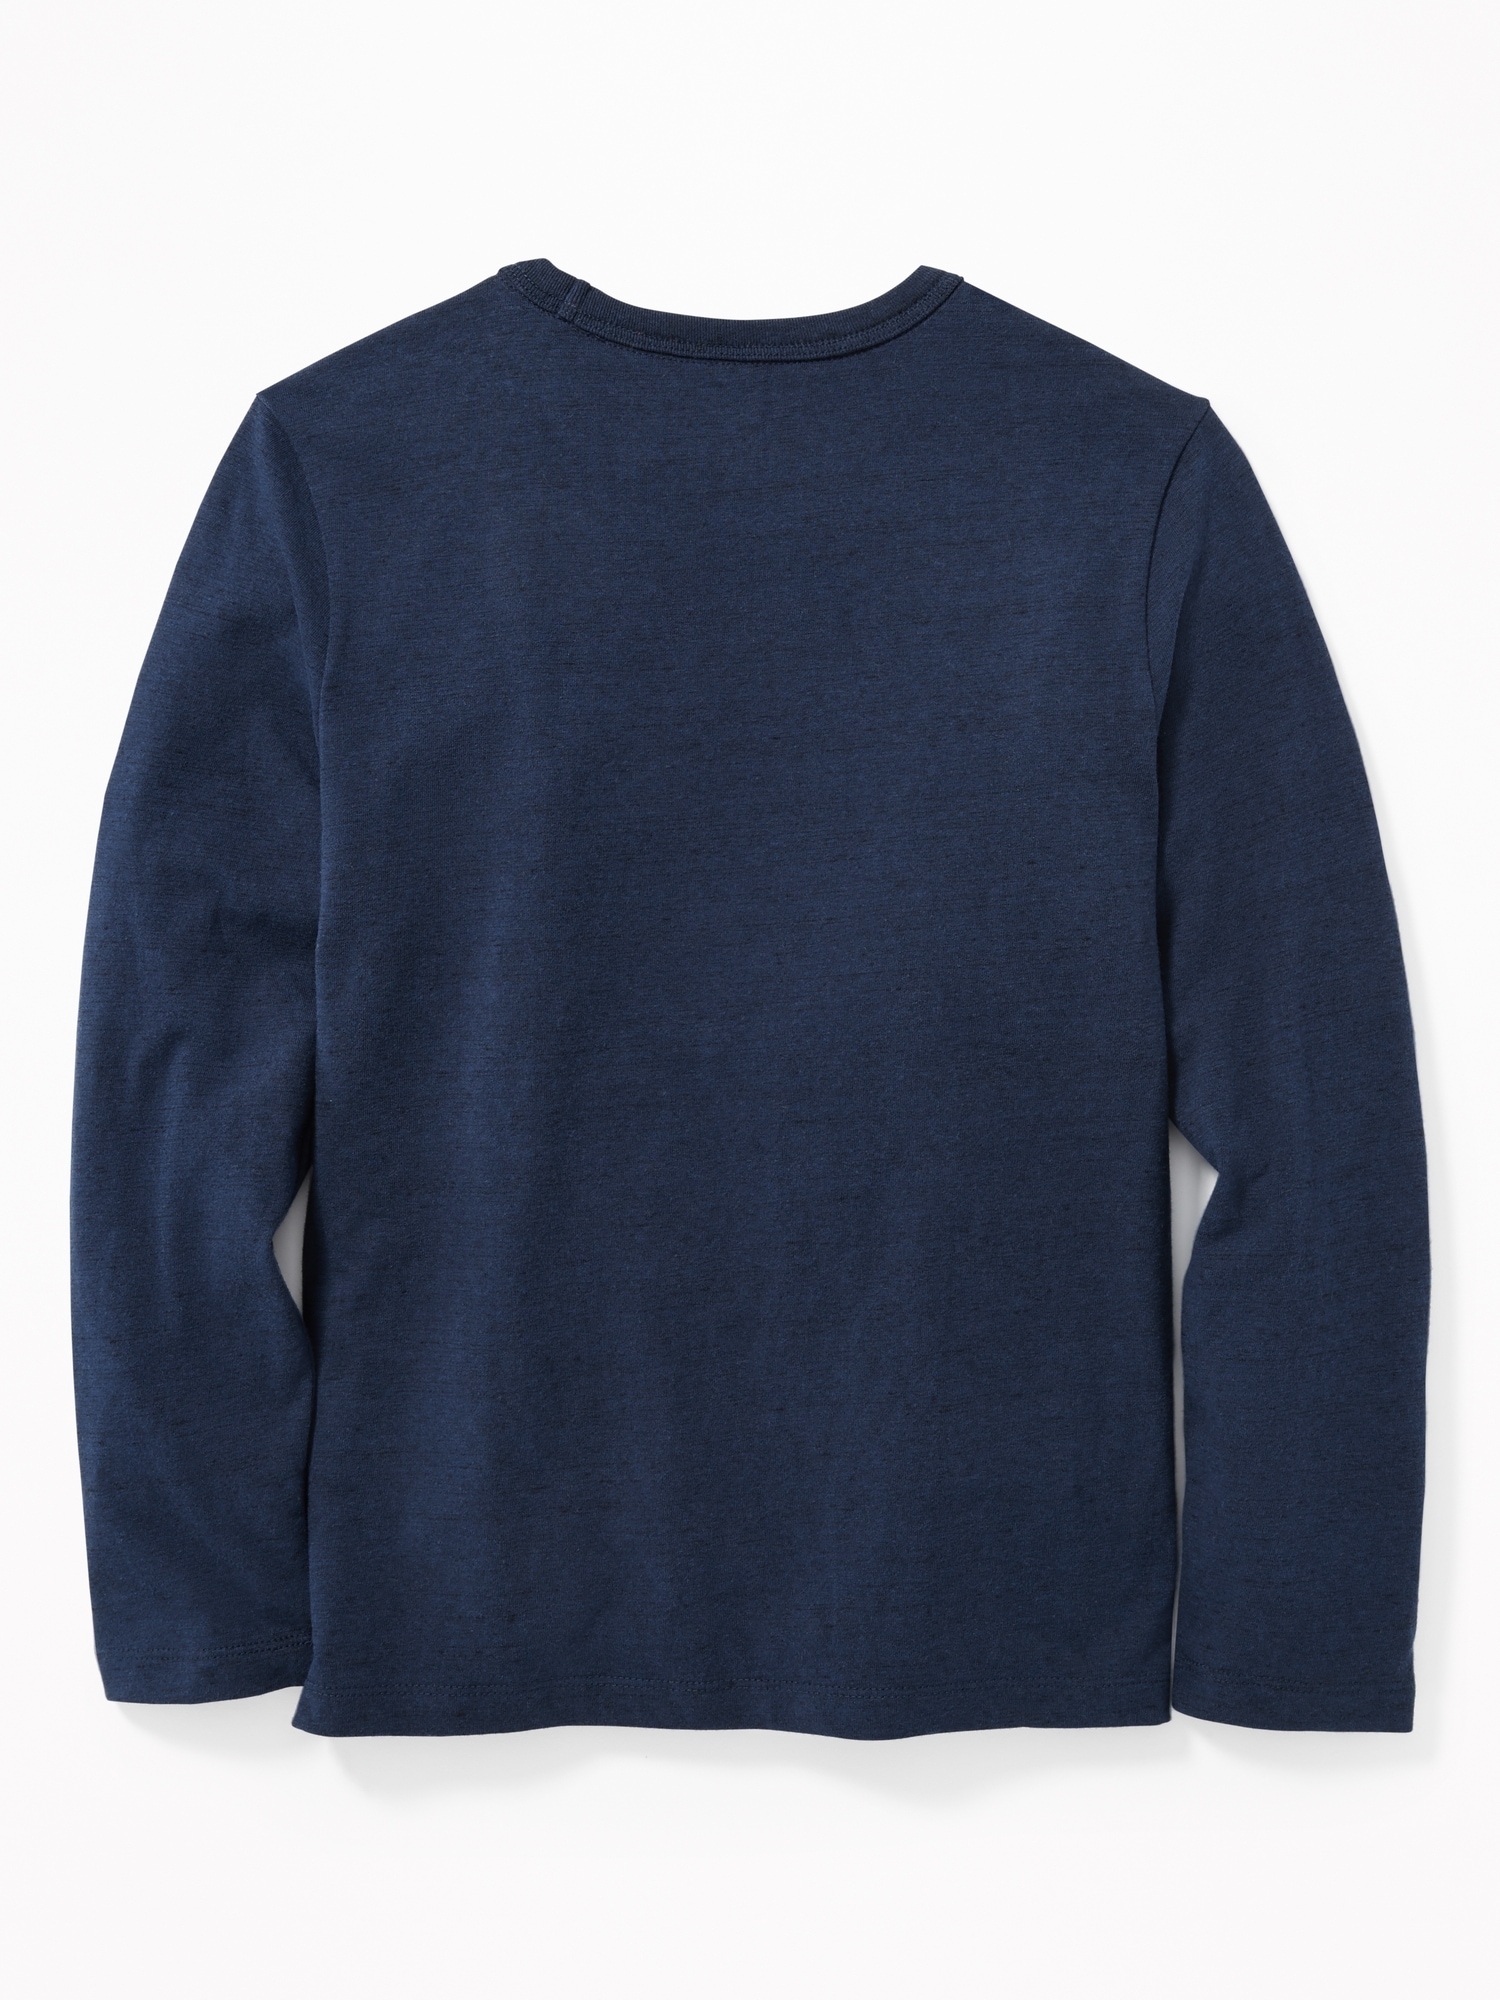 Striped Crew-Neck Tee For Boys | Old Navy